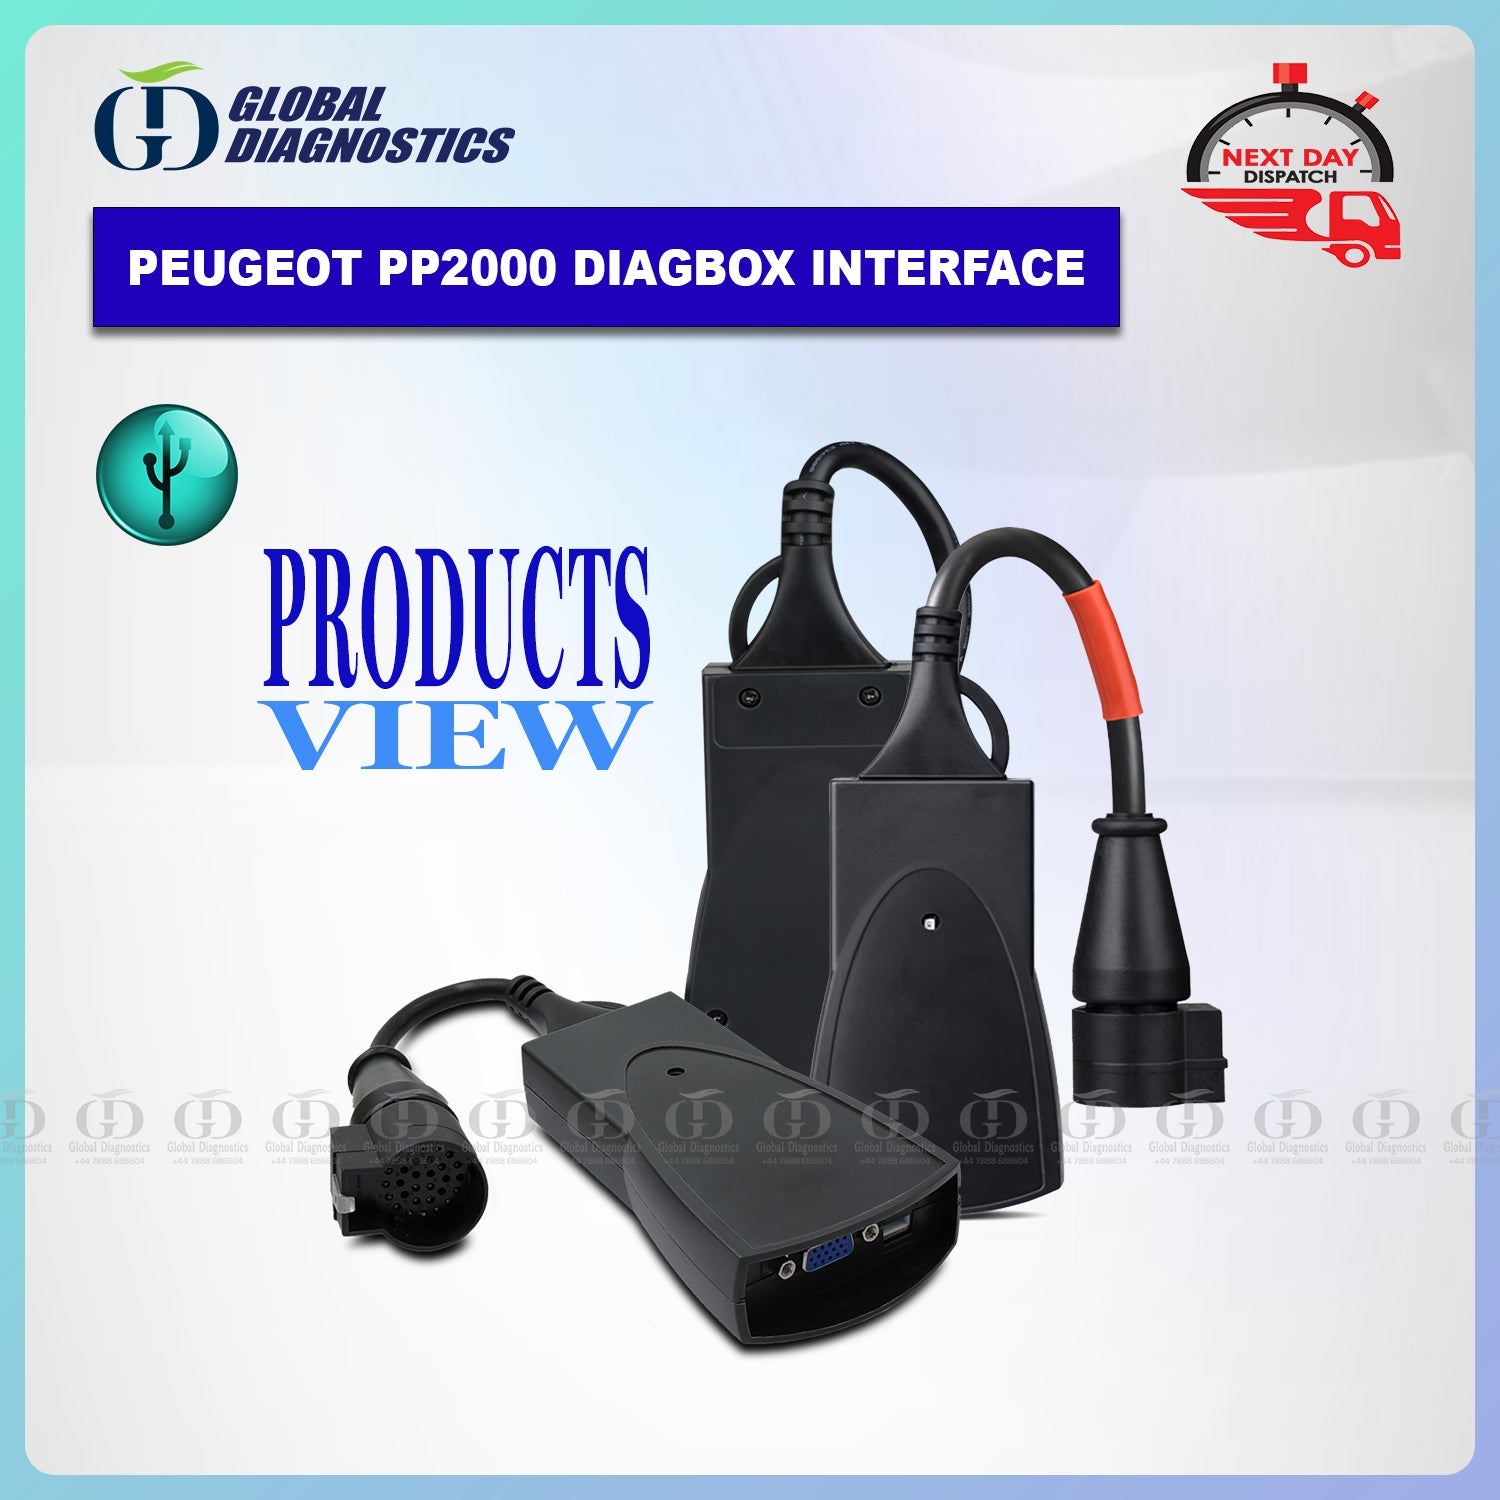 PEUGEOT PP2000 Diagbox Interface Full System